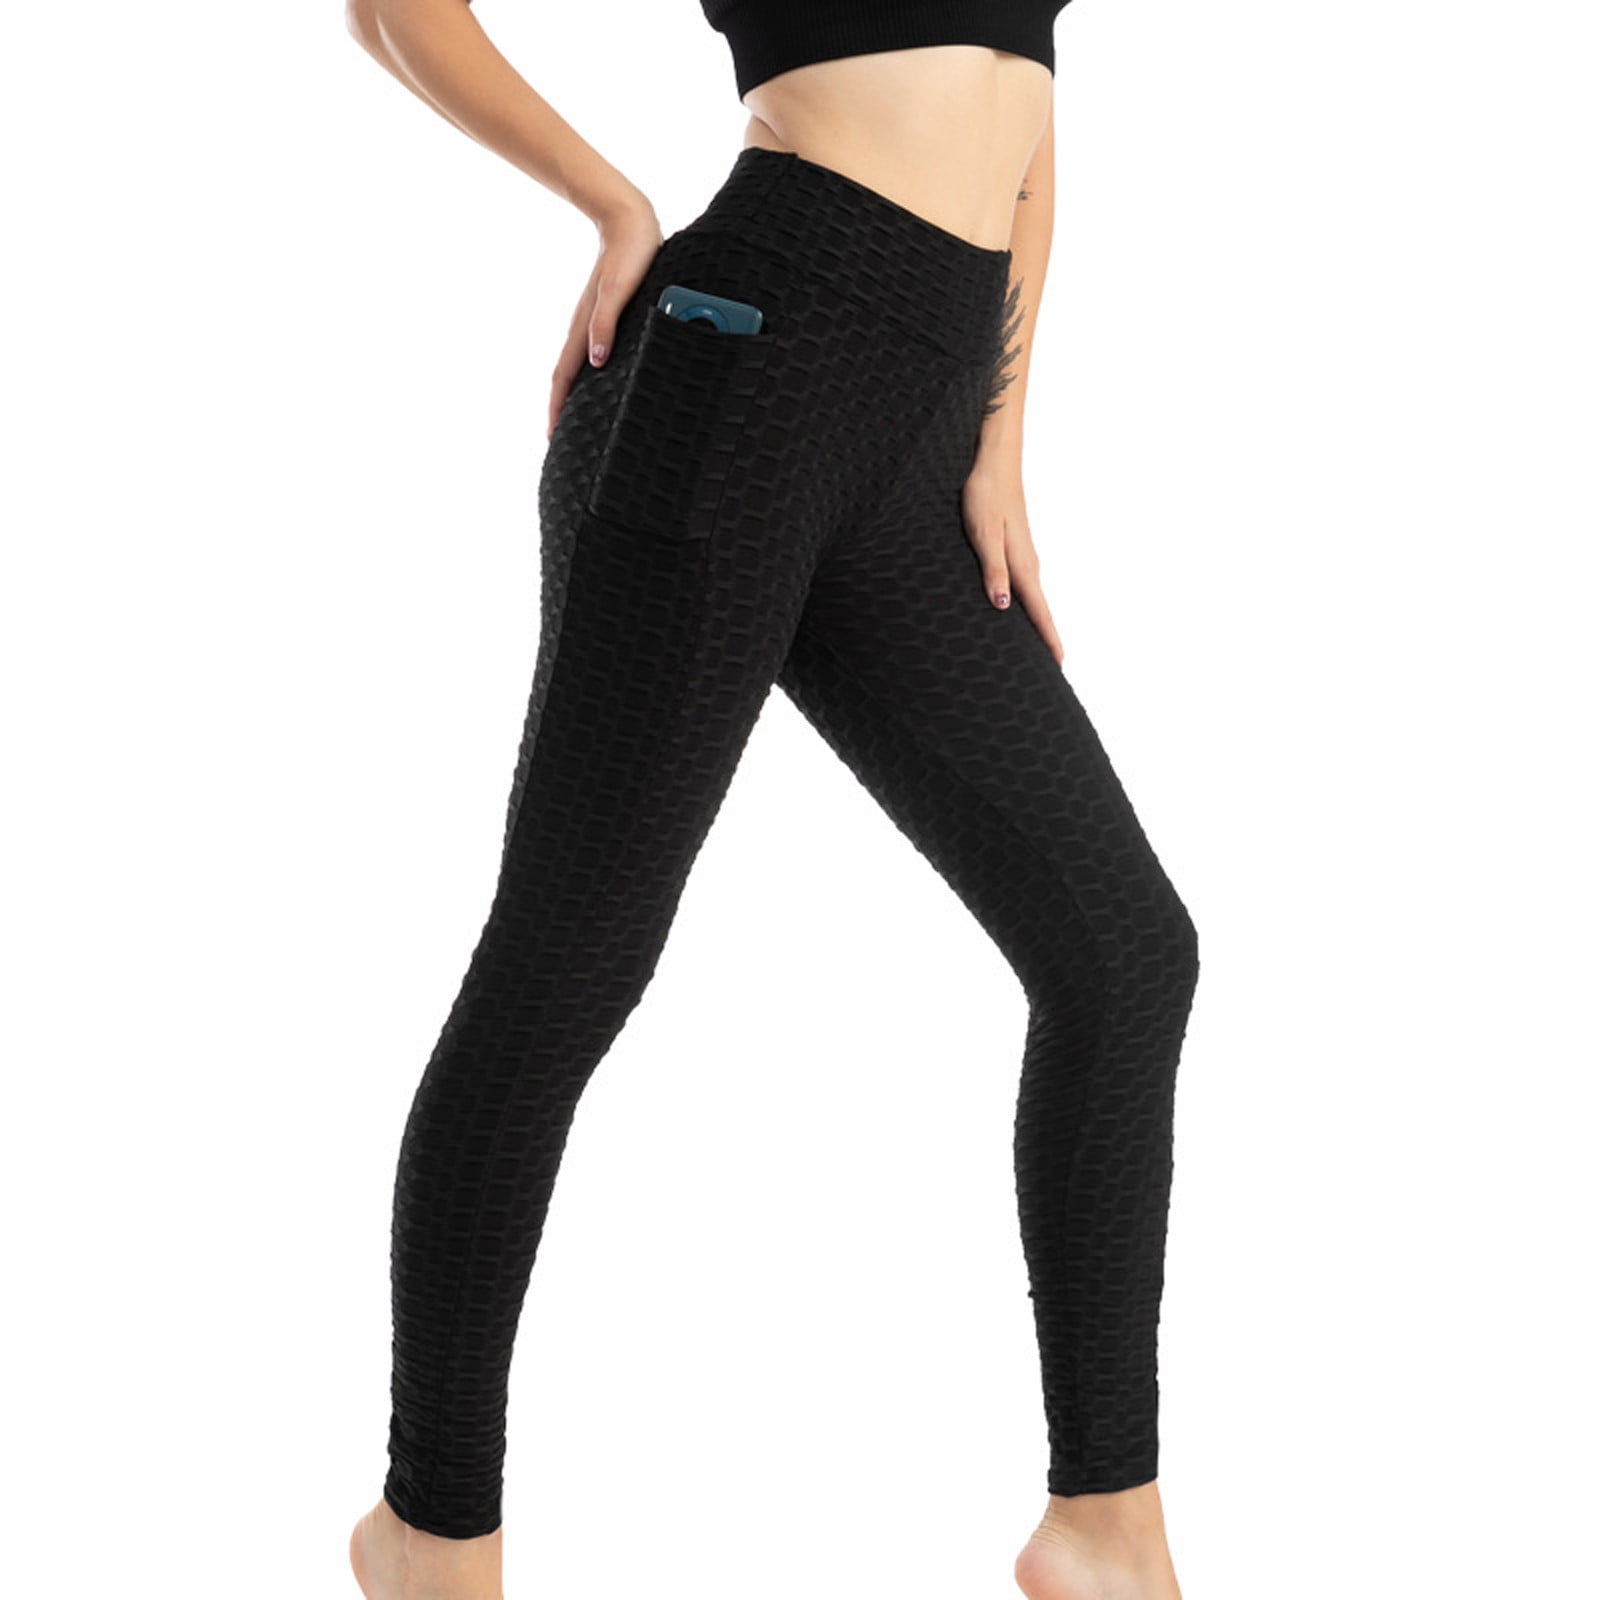 YUNAFFT Yoga Pants for Women Clearance Plus Size Womens Stretch